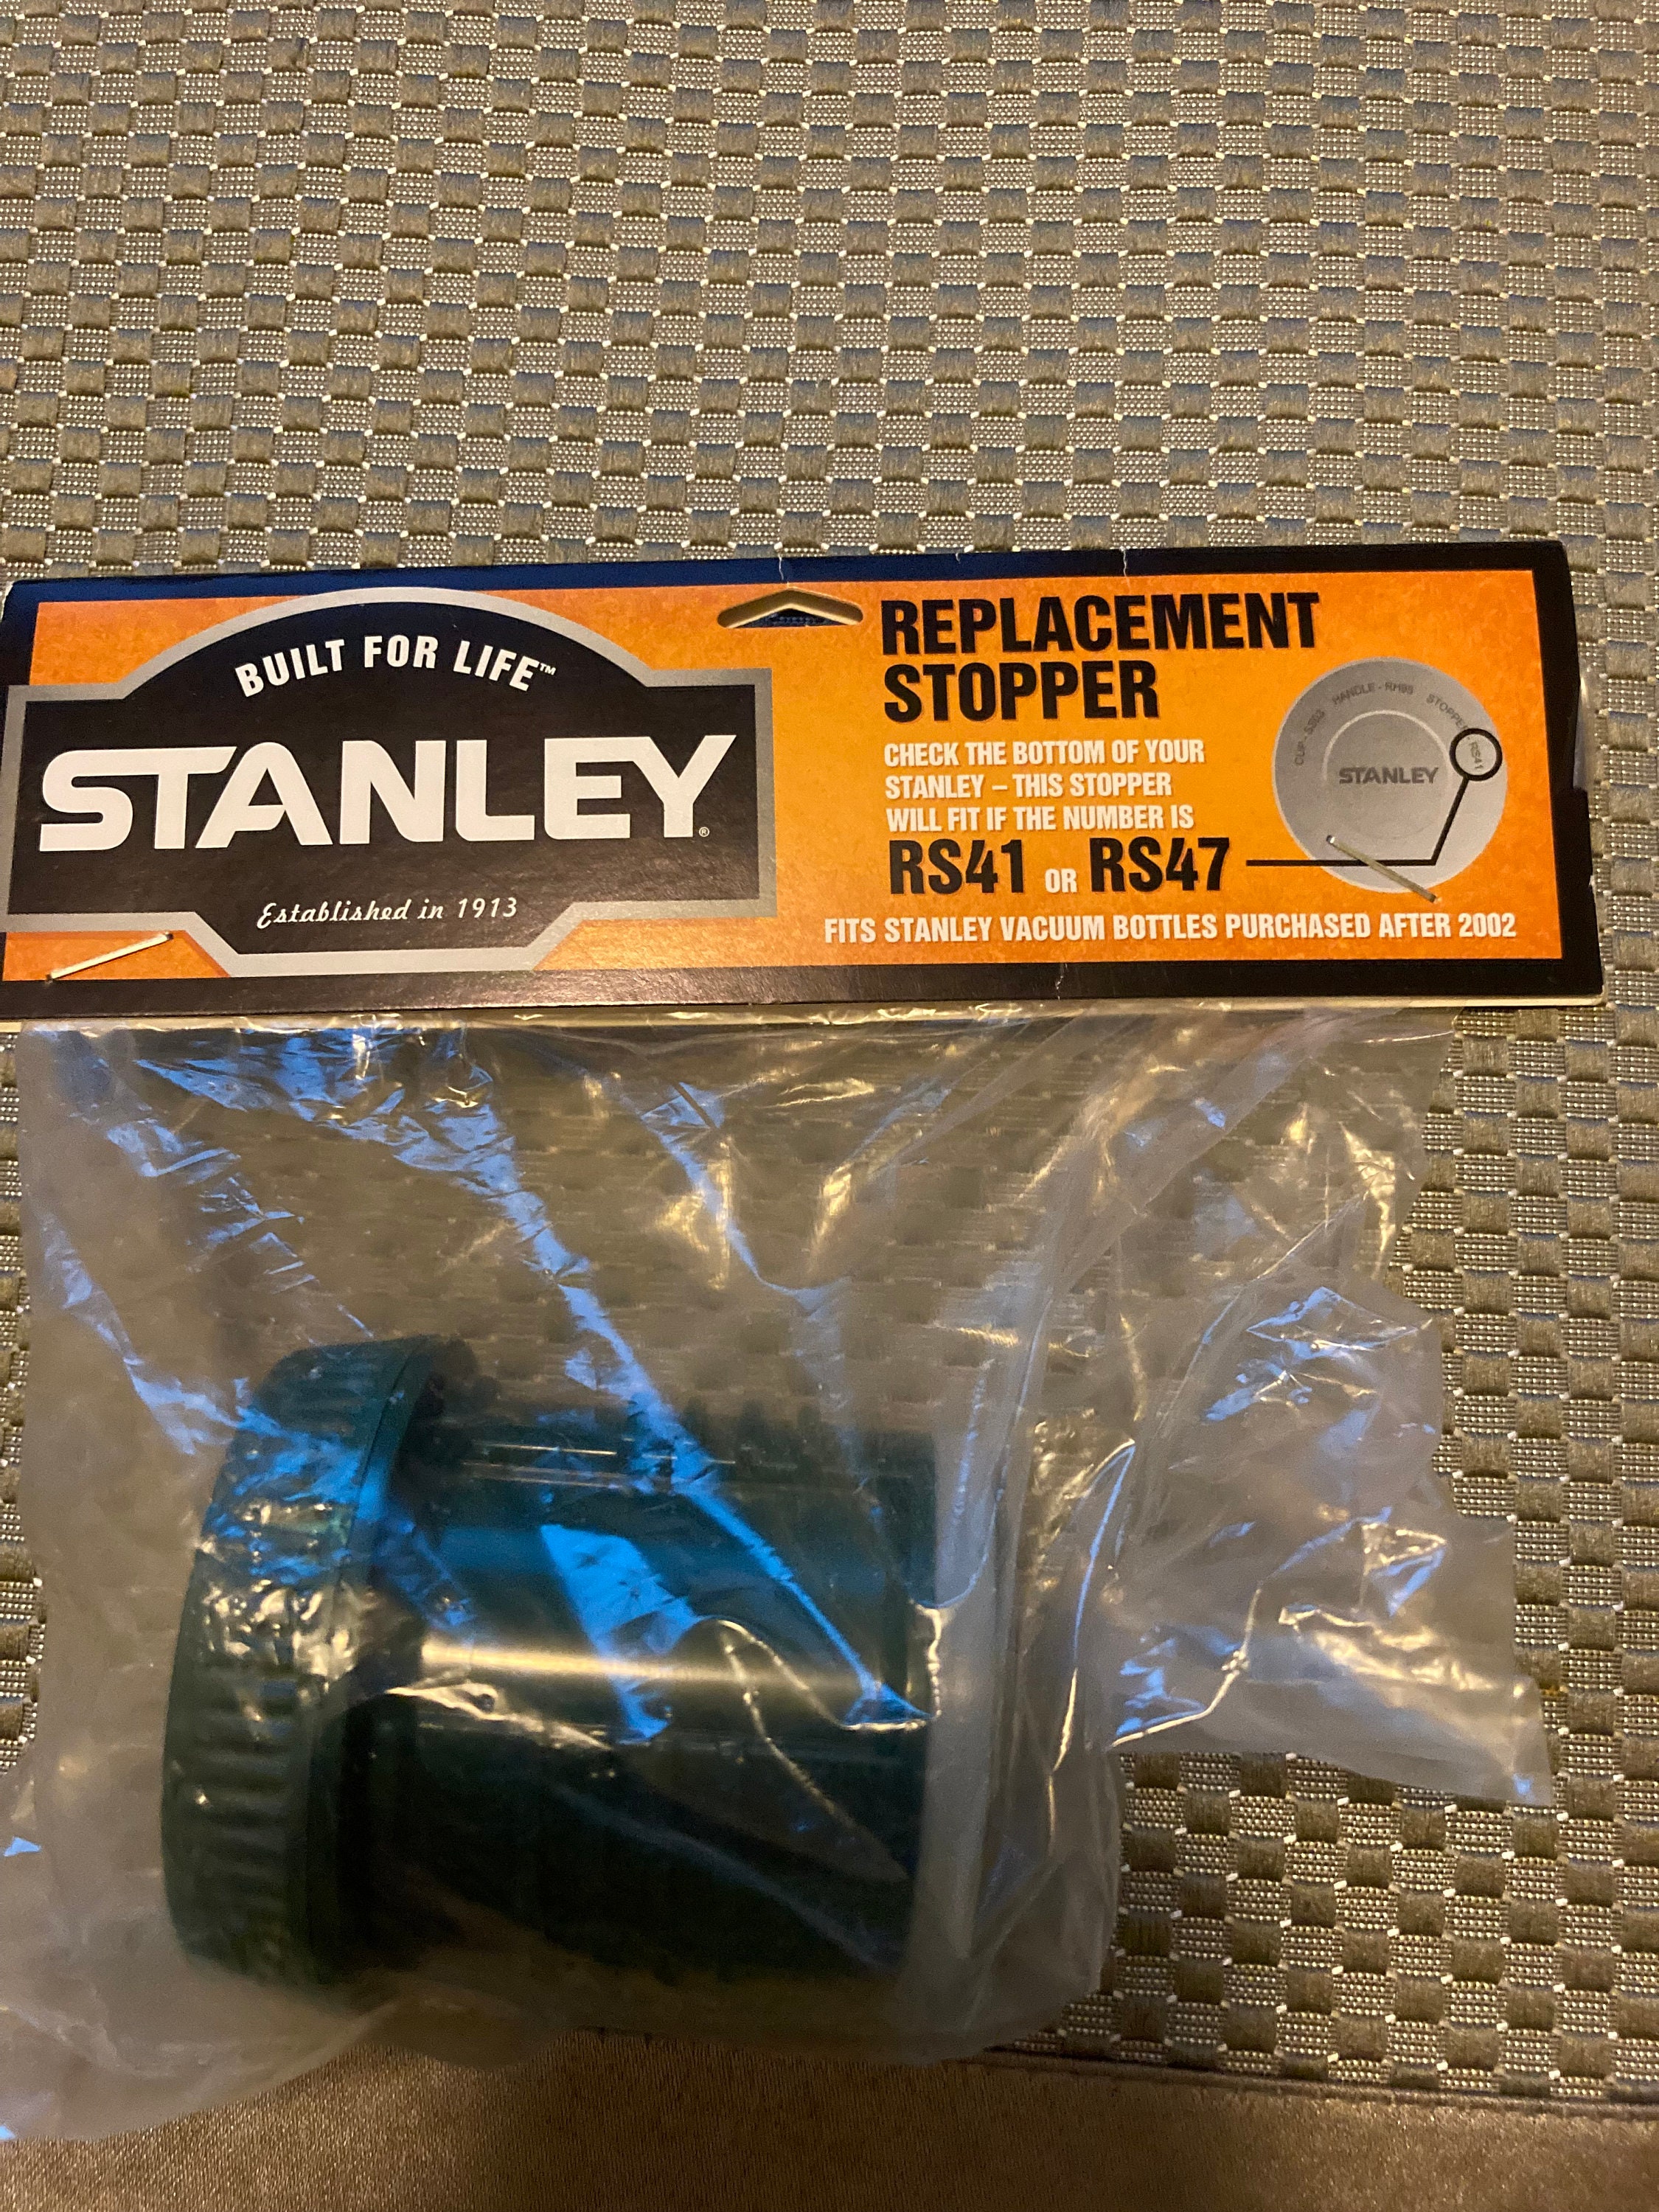 Stanley Replacement Stopper